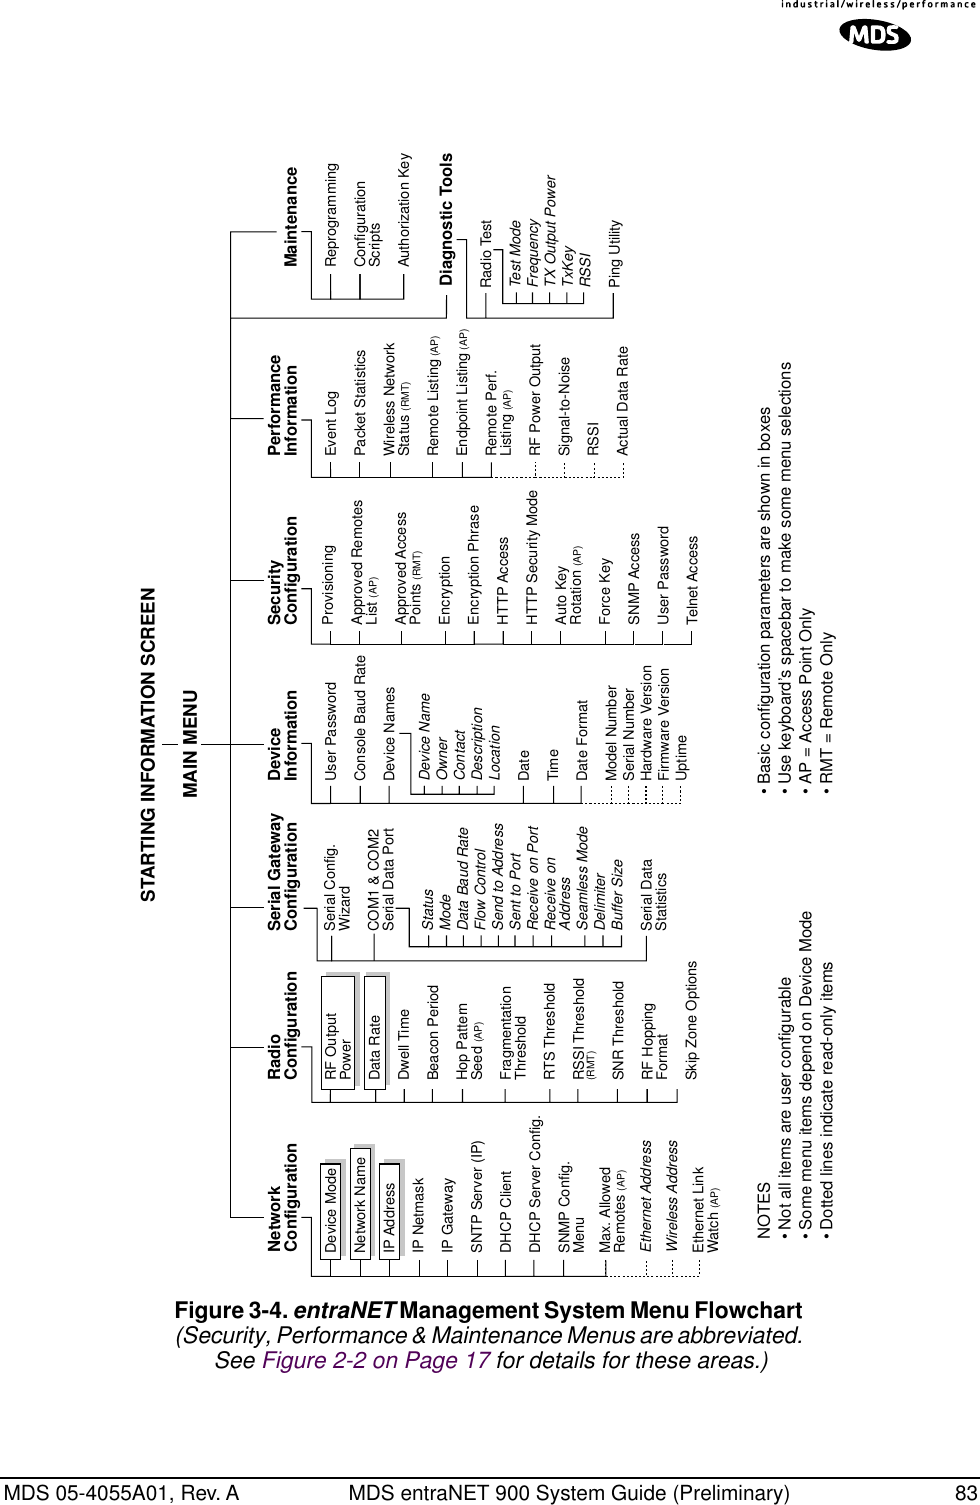 MDS 05-4055A01, Rev. A MDS entraNET 900 System Guide (Preliminary) 83Figure 3-4. entraNET Management System Menu Flowchart (Security, Performance &amp; Maintenance Menus are abbreviated. See Figure 2-2 on Page 17 for details for these areas.)NOTES•Not all items are user configurable•Some menu items depend on Device Mode•Dotted lines indicate read-only items •Basic configuration parameters are shown in boxes•Use keyboard’s spacebar to make some menu selections•AP = Access Point Only•RMT = Remote OnlyUser PasswordConsole Baud RateDevice NamesDevice NameOwnerContactDescriptionLocationDateTimeDate FormatModel NumberSerial NumberHardware VersionFirmware VersionUptimeNetworkConfiguration RadioConfiguration Serial GatewayConfiguration DeviceInformation MaintenanceSecurityConfigurationProvisioningApproved RemotesList (AP)Approved AccessPoints (RMT)EncryptionEncryption PhraseHTTP AccessHTTP Security ModeAuto KeyRotation (AP)Force KeySNMP AccessUser PasswordTelnet AccessReprogrammingConfigurationScriptsAuthorization KeySerial Config.WizardCOM1 &amp; COM2Serial Data PortStatusModeData Baud RateFlow ControlSend to AddressSent to PortReceive on PortReceive onAddressSeamless ModeDelimiterBuffer SizeSerial DataStatisticsSTARTING INFORMATION SCREENMAIN MENURF OutputPowerData RateDwell TimeBeacon PeriodHop PatternSeed (AP)FragmentationThresholdRTS ThresholdRSSI Threshold(RMT)SNR ThresholdRF HoppingFormatSkip Zone OptionsDevice ModeNetwork NameIP AddressIP NetmaskIP GatewaySNTP Server (IP)DHCP ClientDHCP Server Config.SNMP Config.MenuMax. AllowedRemotes (AP)Ethernet AddressWireless AddressEthernet LinkWatch (AP)PerformanceInformationEvent LogPacket StatisticsWireless NetworkStatus (RMT)Remote Listing (AP)Endpoint Listing (AP)Remote Perf.Listing (AP)RF Power OutputSignal-to-NoiseRSSIActual Data RateDiagnostic ToolsRadio TestTest ModeFrequencyTX Output PowerTxKeyRSSIPing Utility